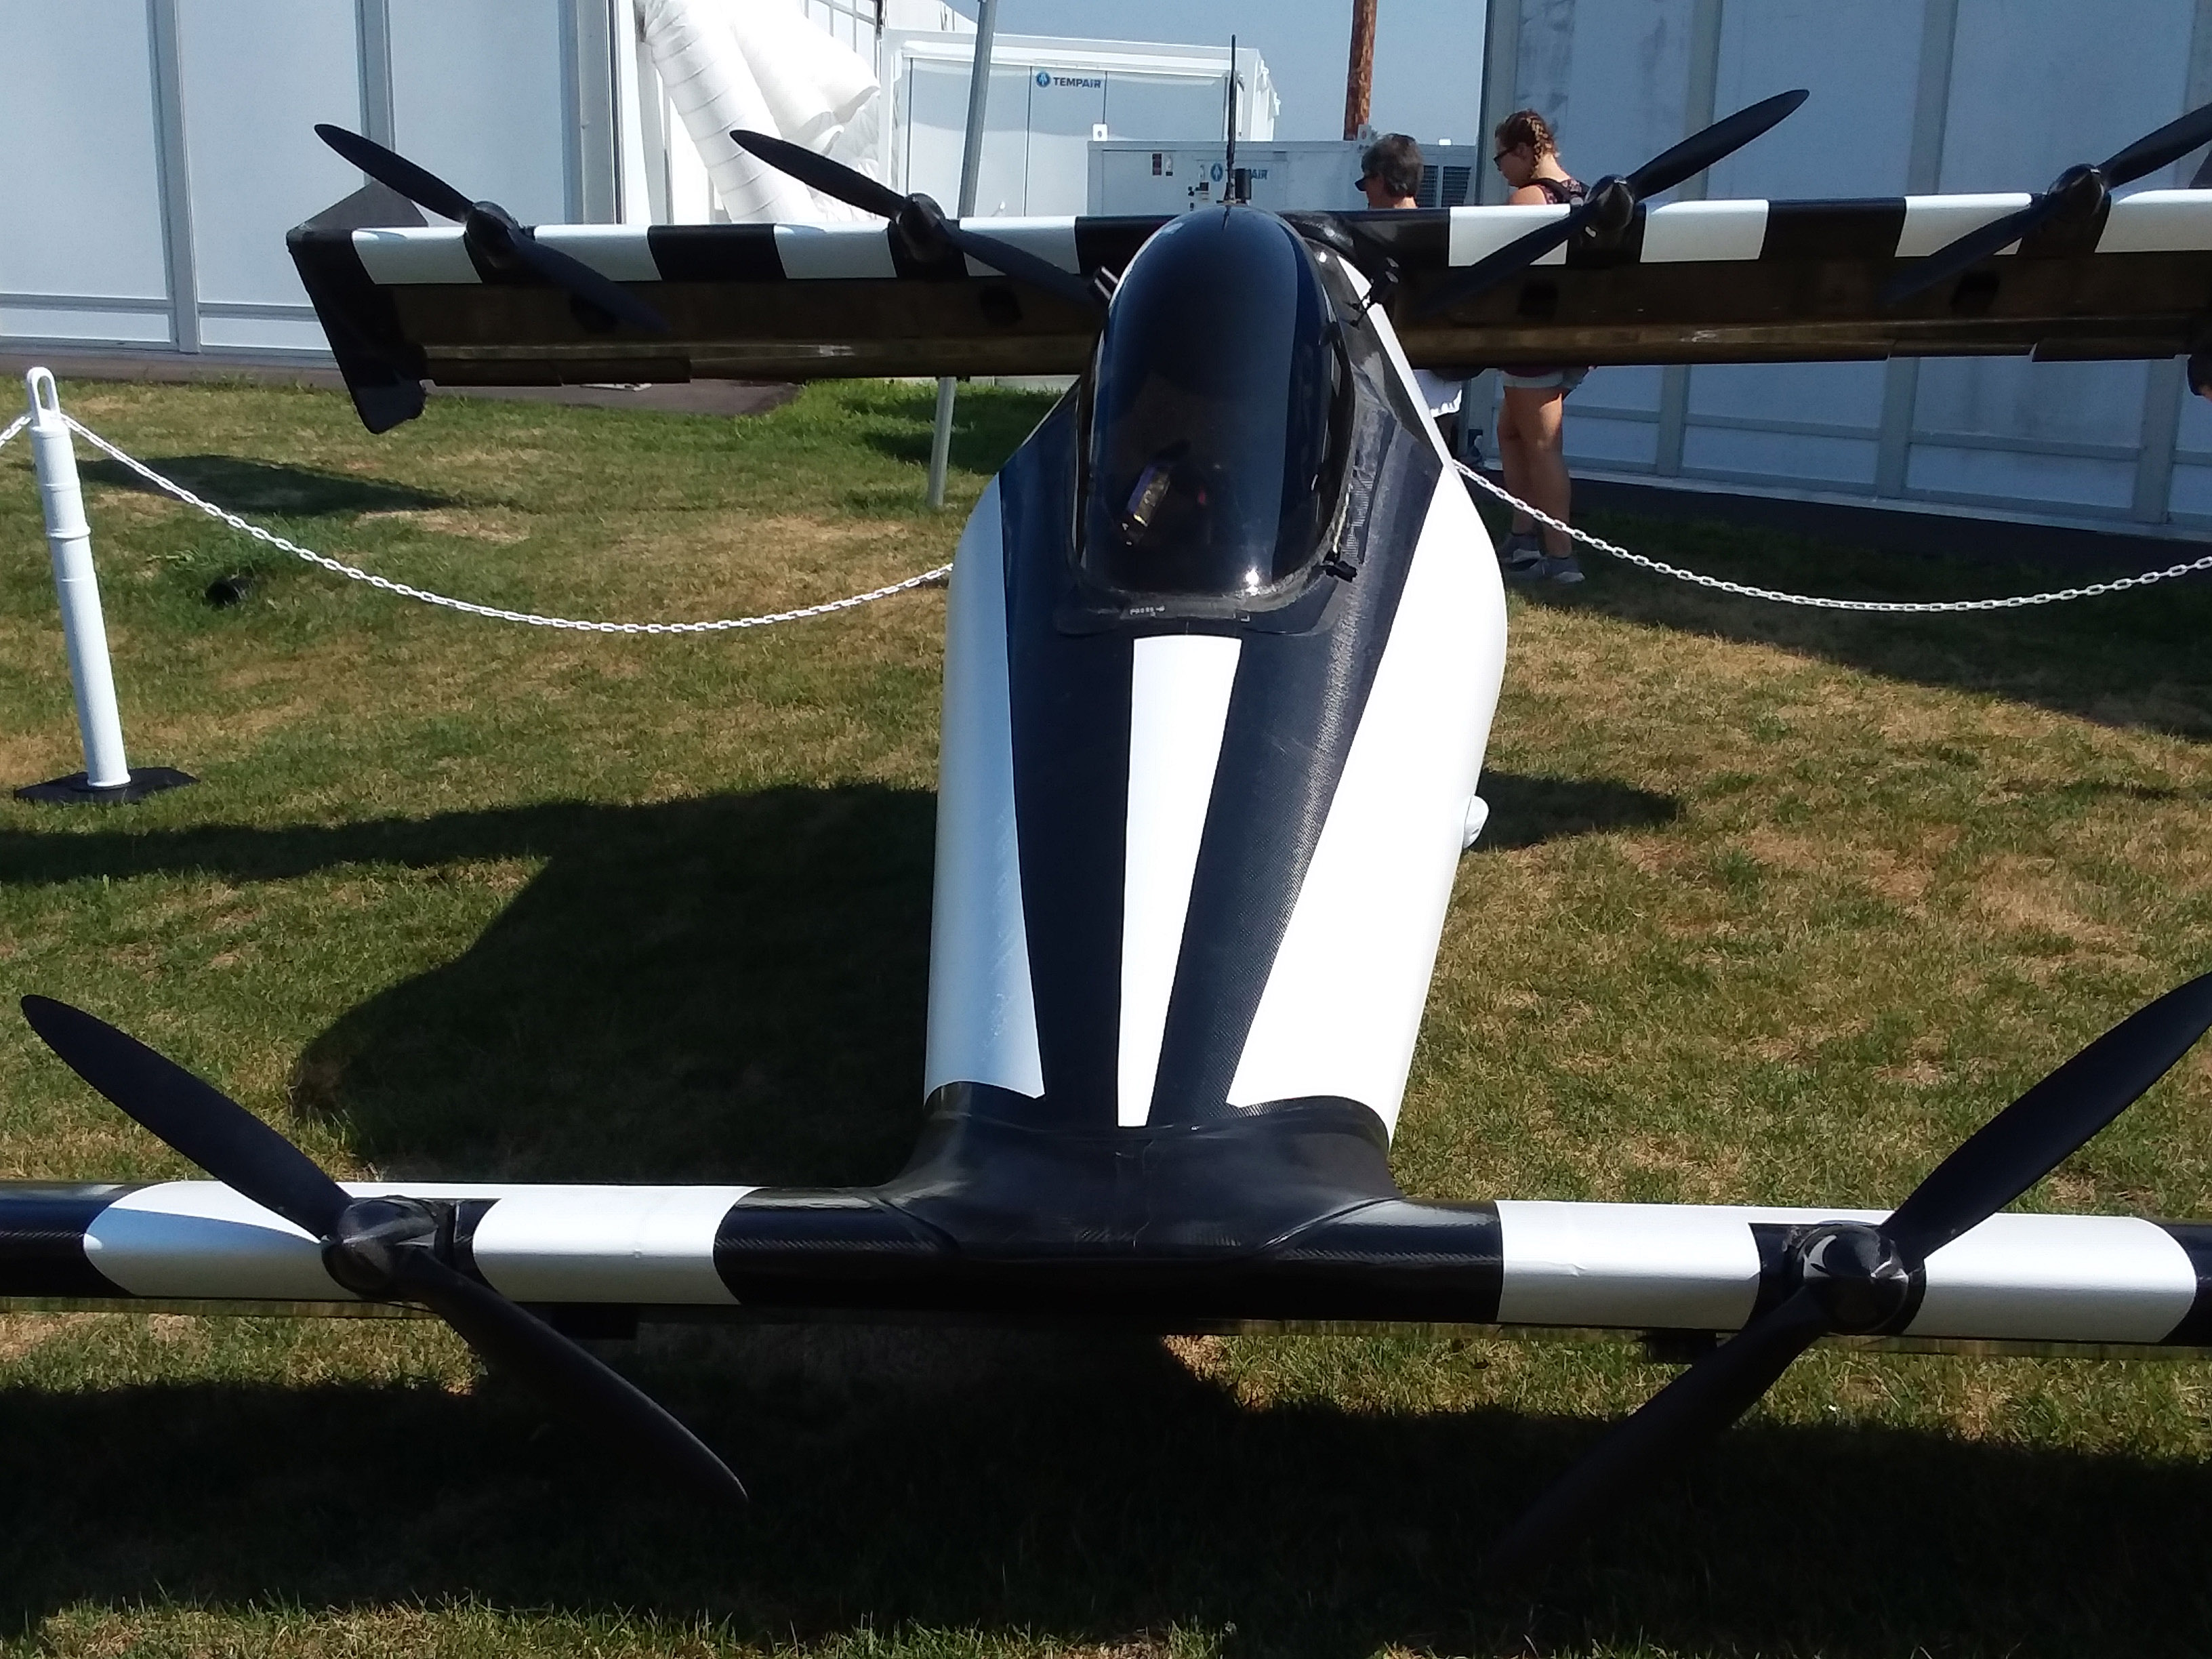 The Opener BlackFly ultralight vertical-takeoff-and-landing aircraft is drawing attention at EAA AirVenture. Photo by Alyssa Cobb.